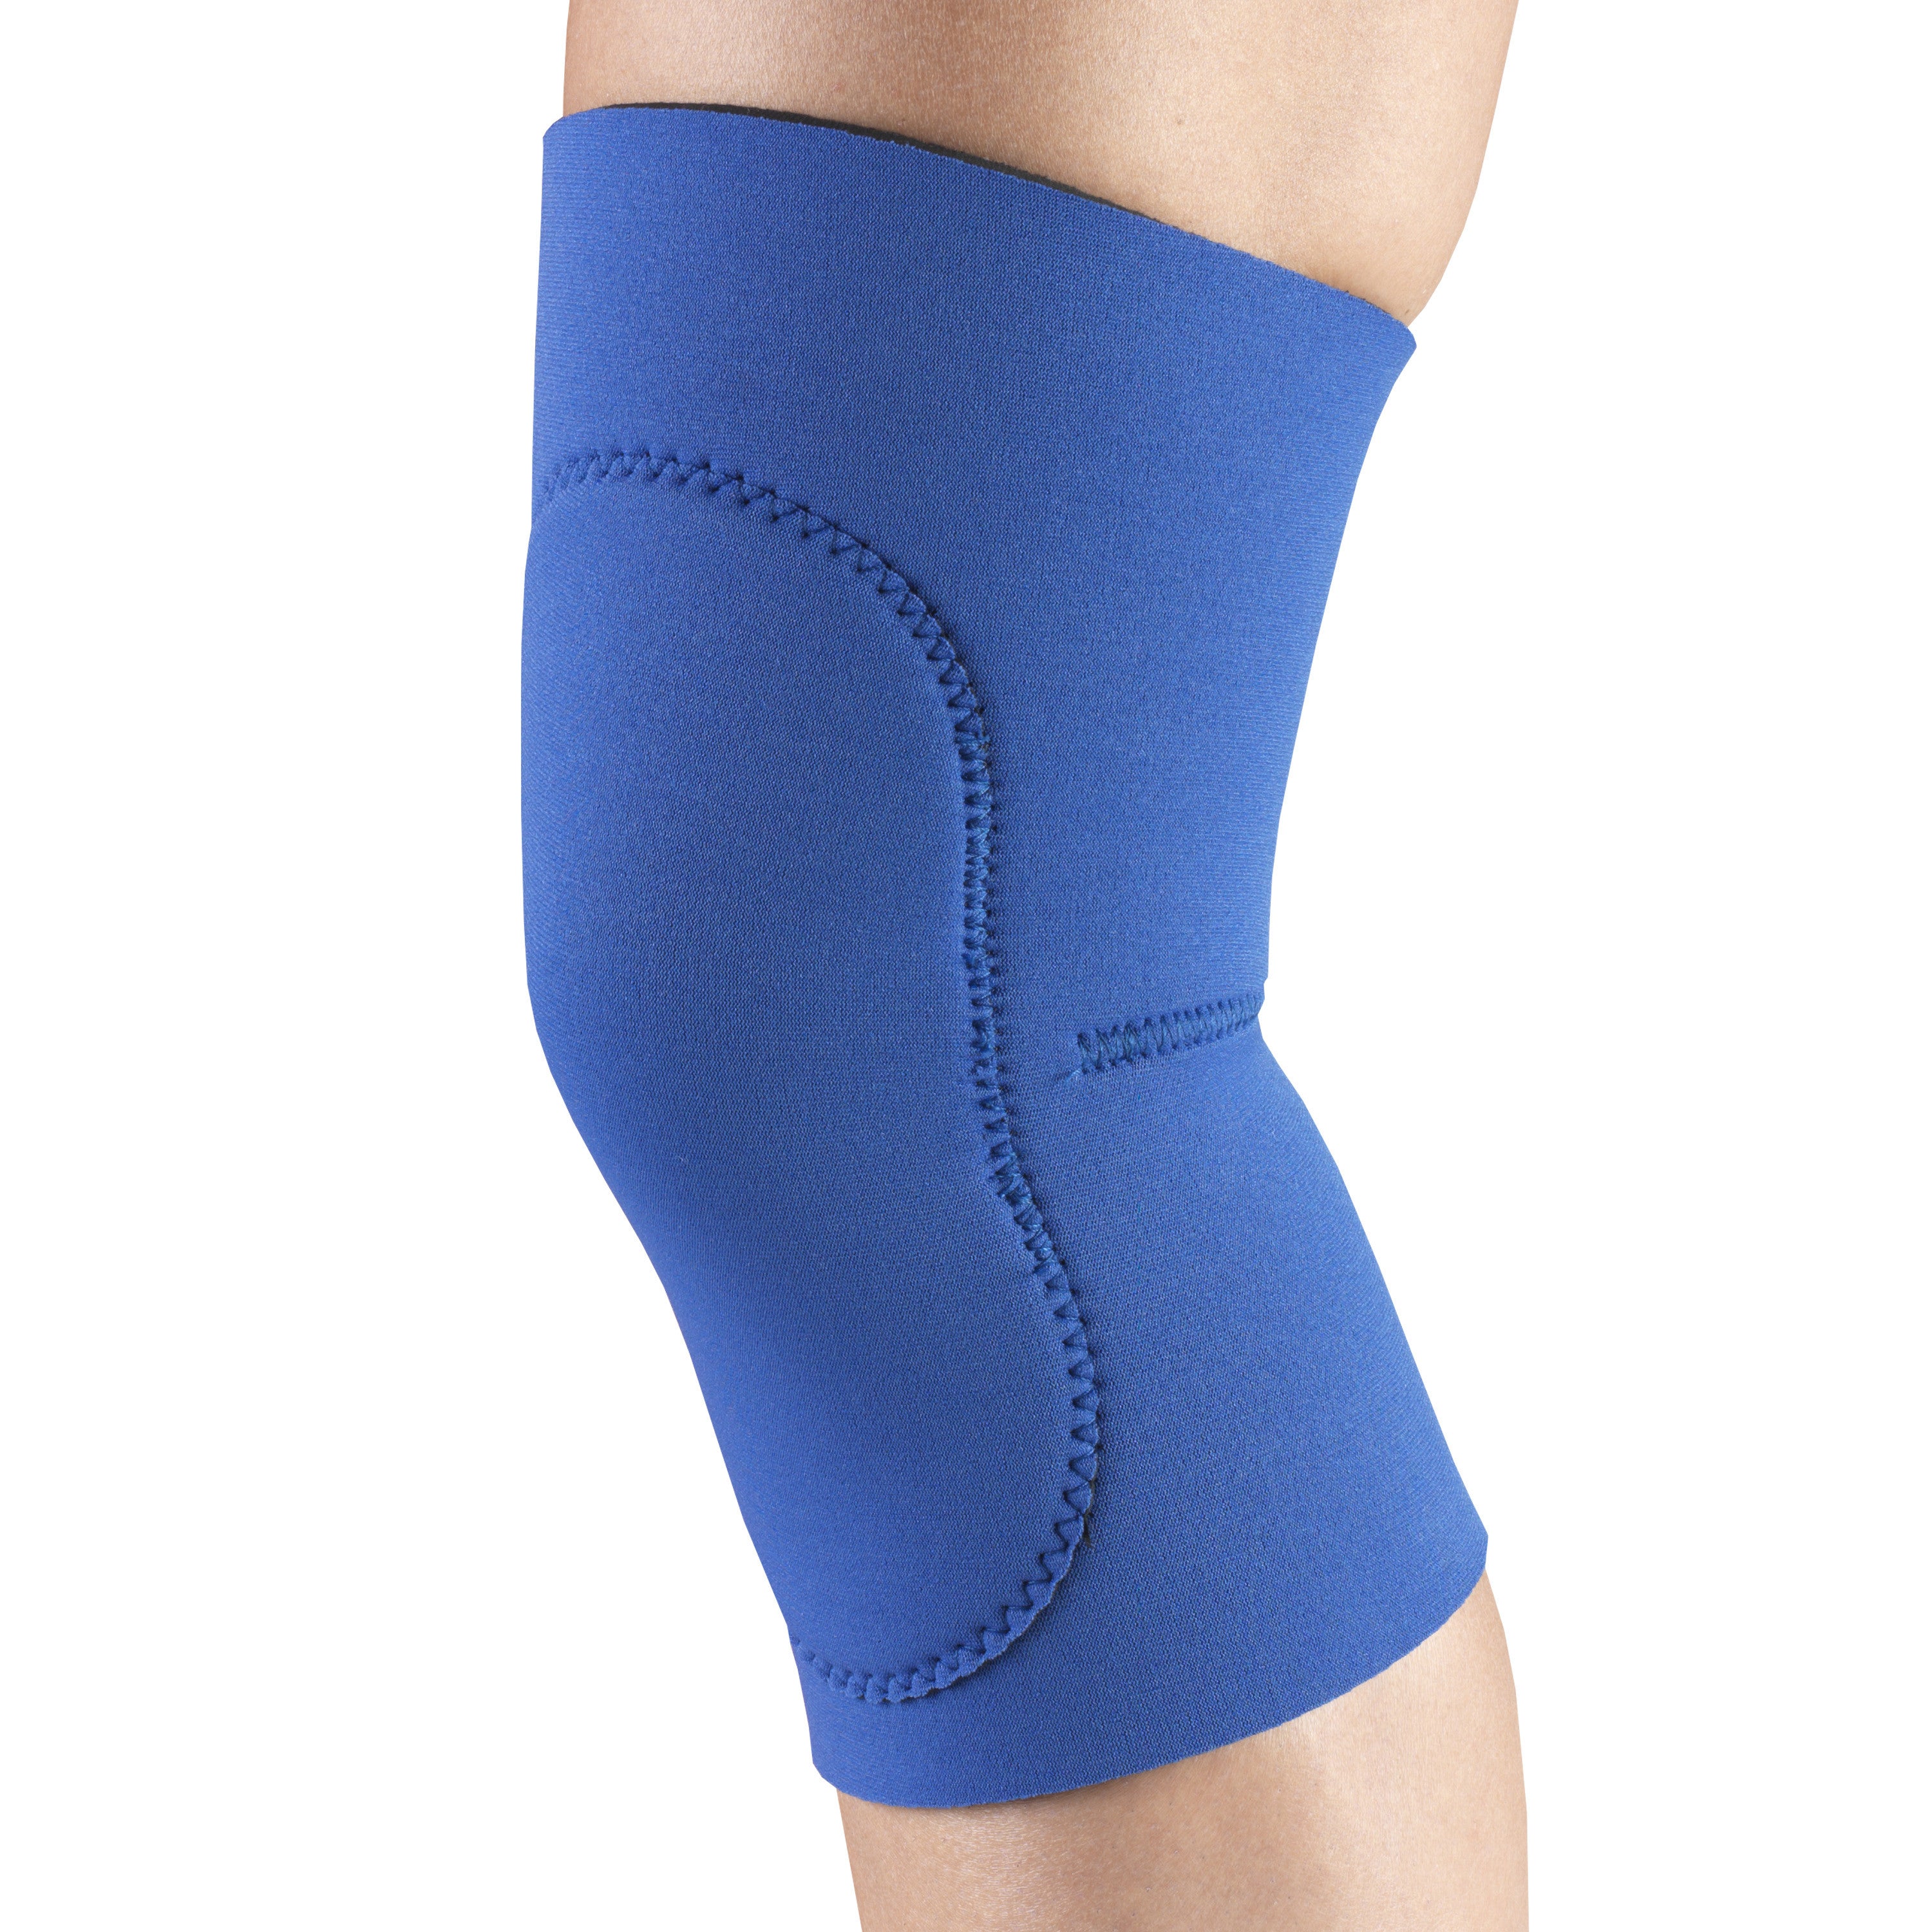 O141 / NEOPRENE KNEE SLEEVE - OVAL PAD (NOT FOR SALE IN CANADA